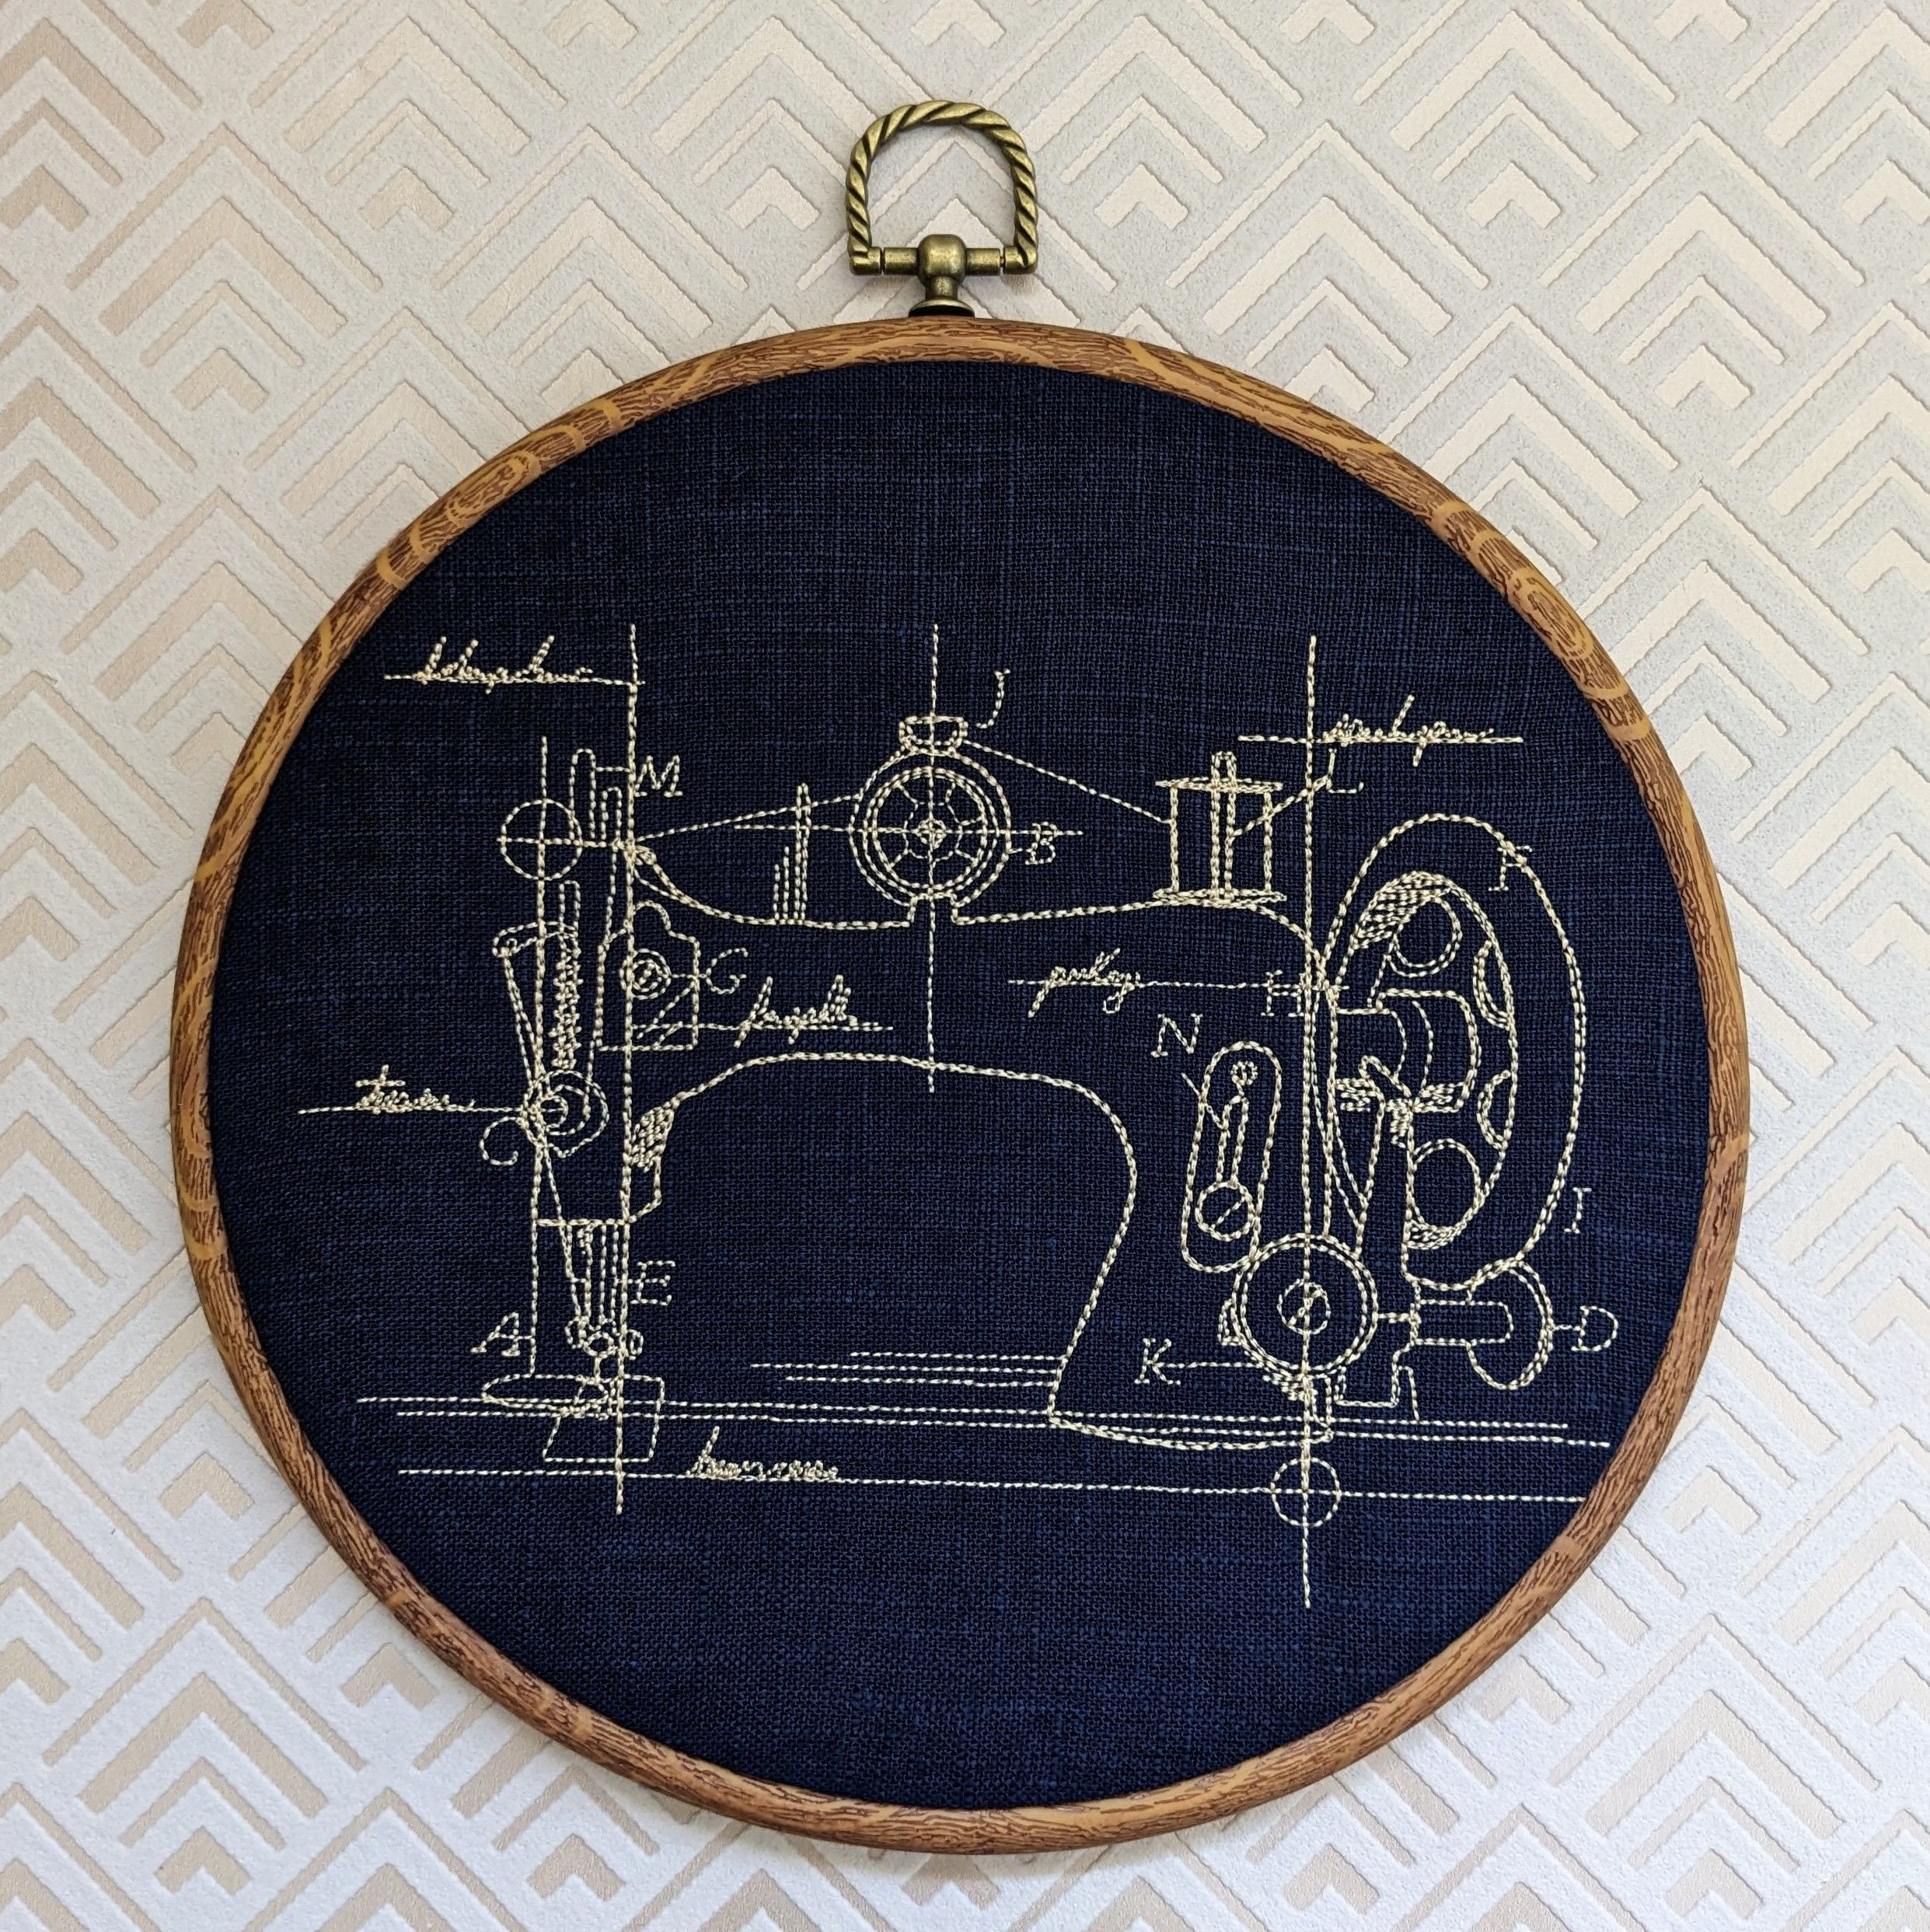 Not Your Grandma's Embroidery Patterns: A Modern Twist on an Old